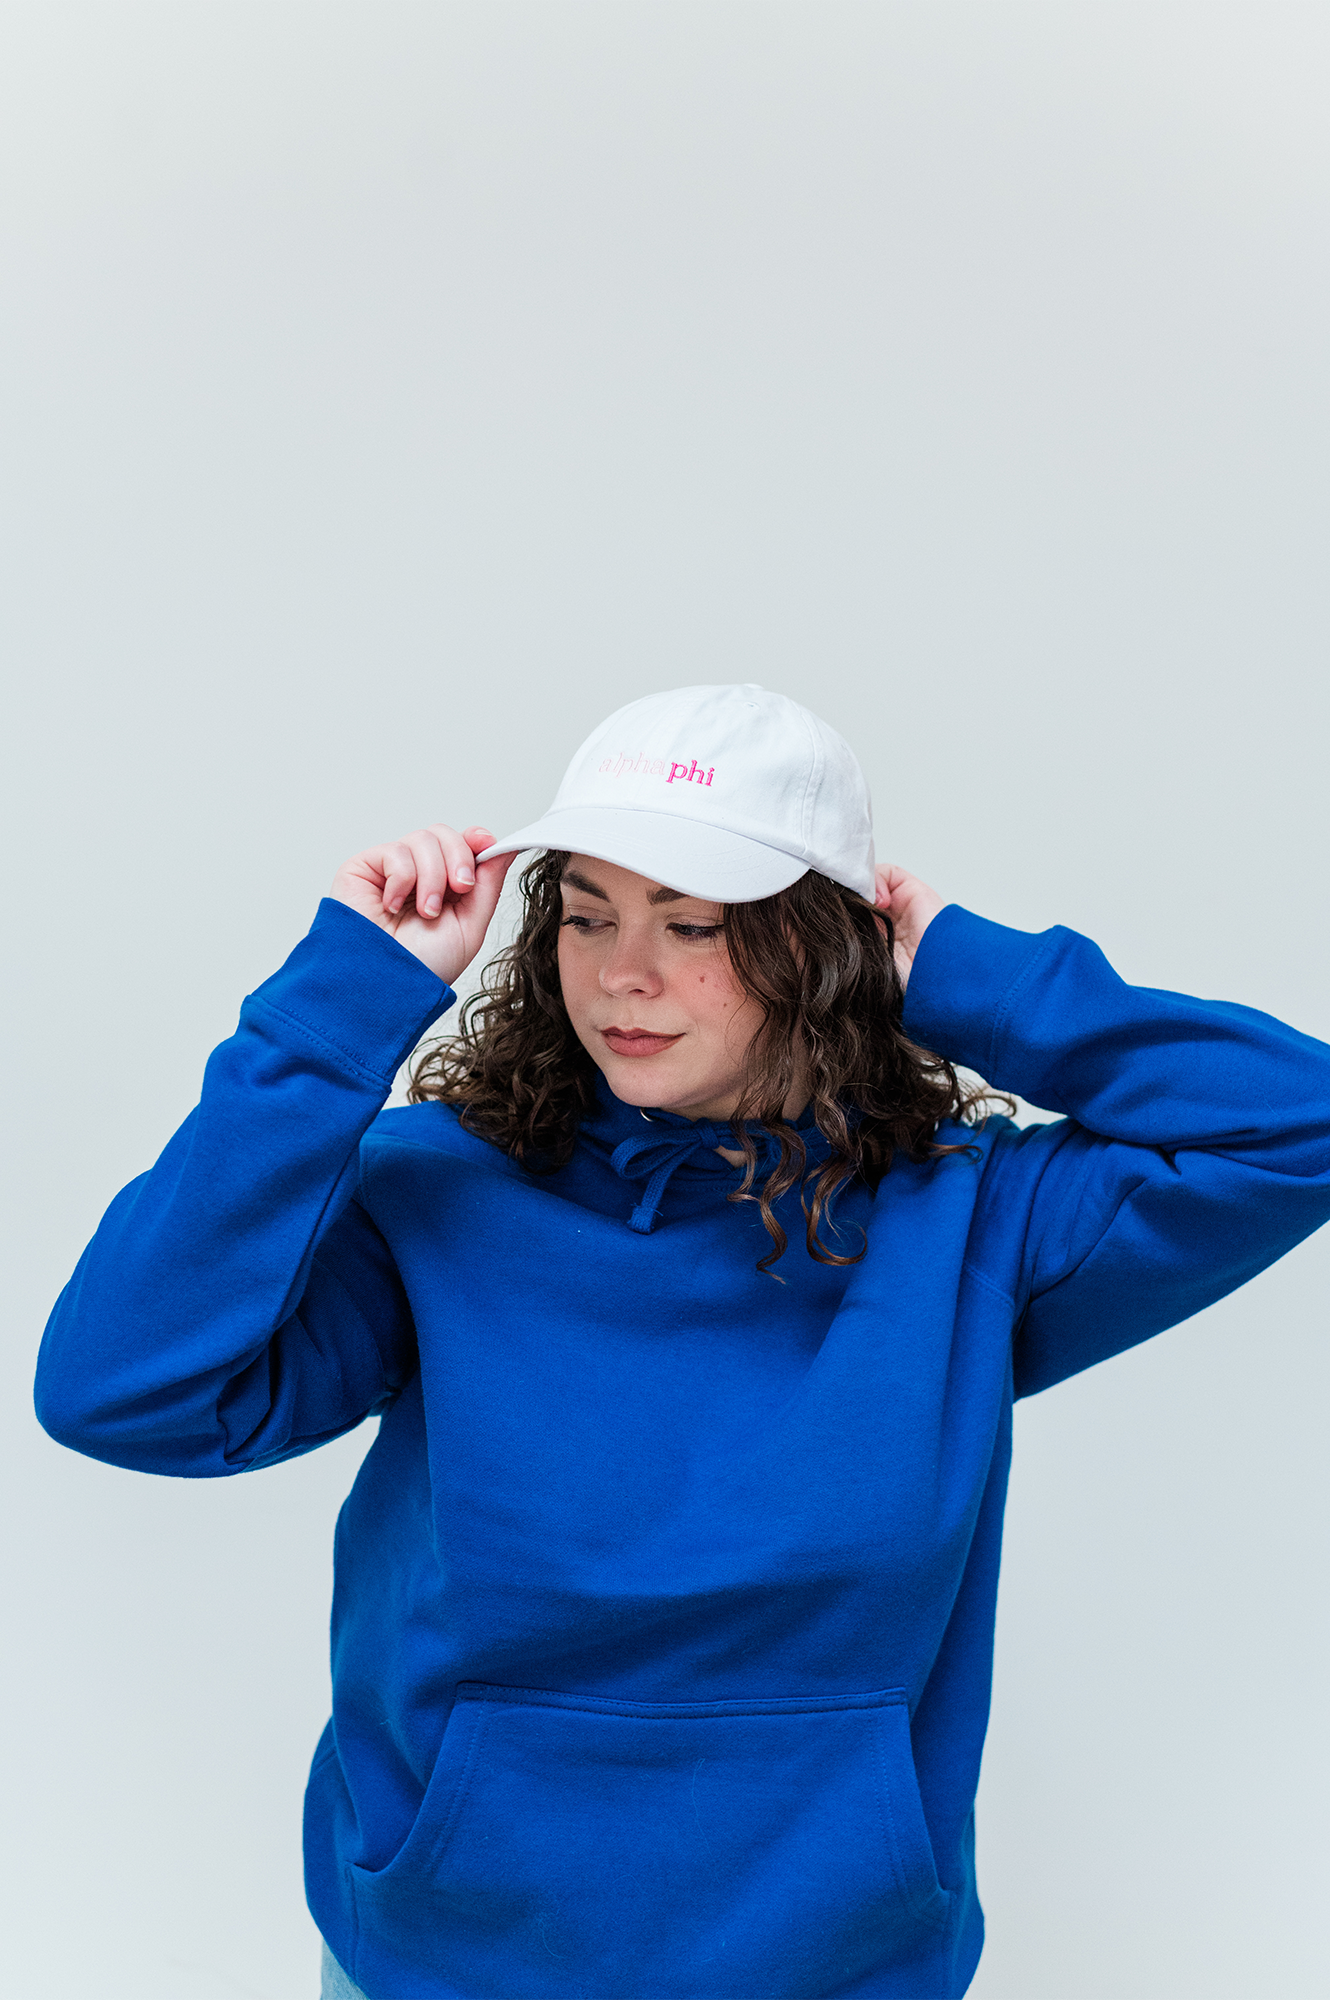 a woman wearing a blue sweatshirt and a white hat